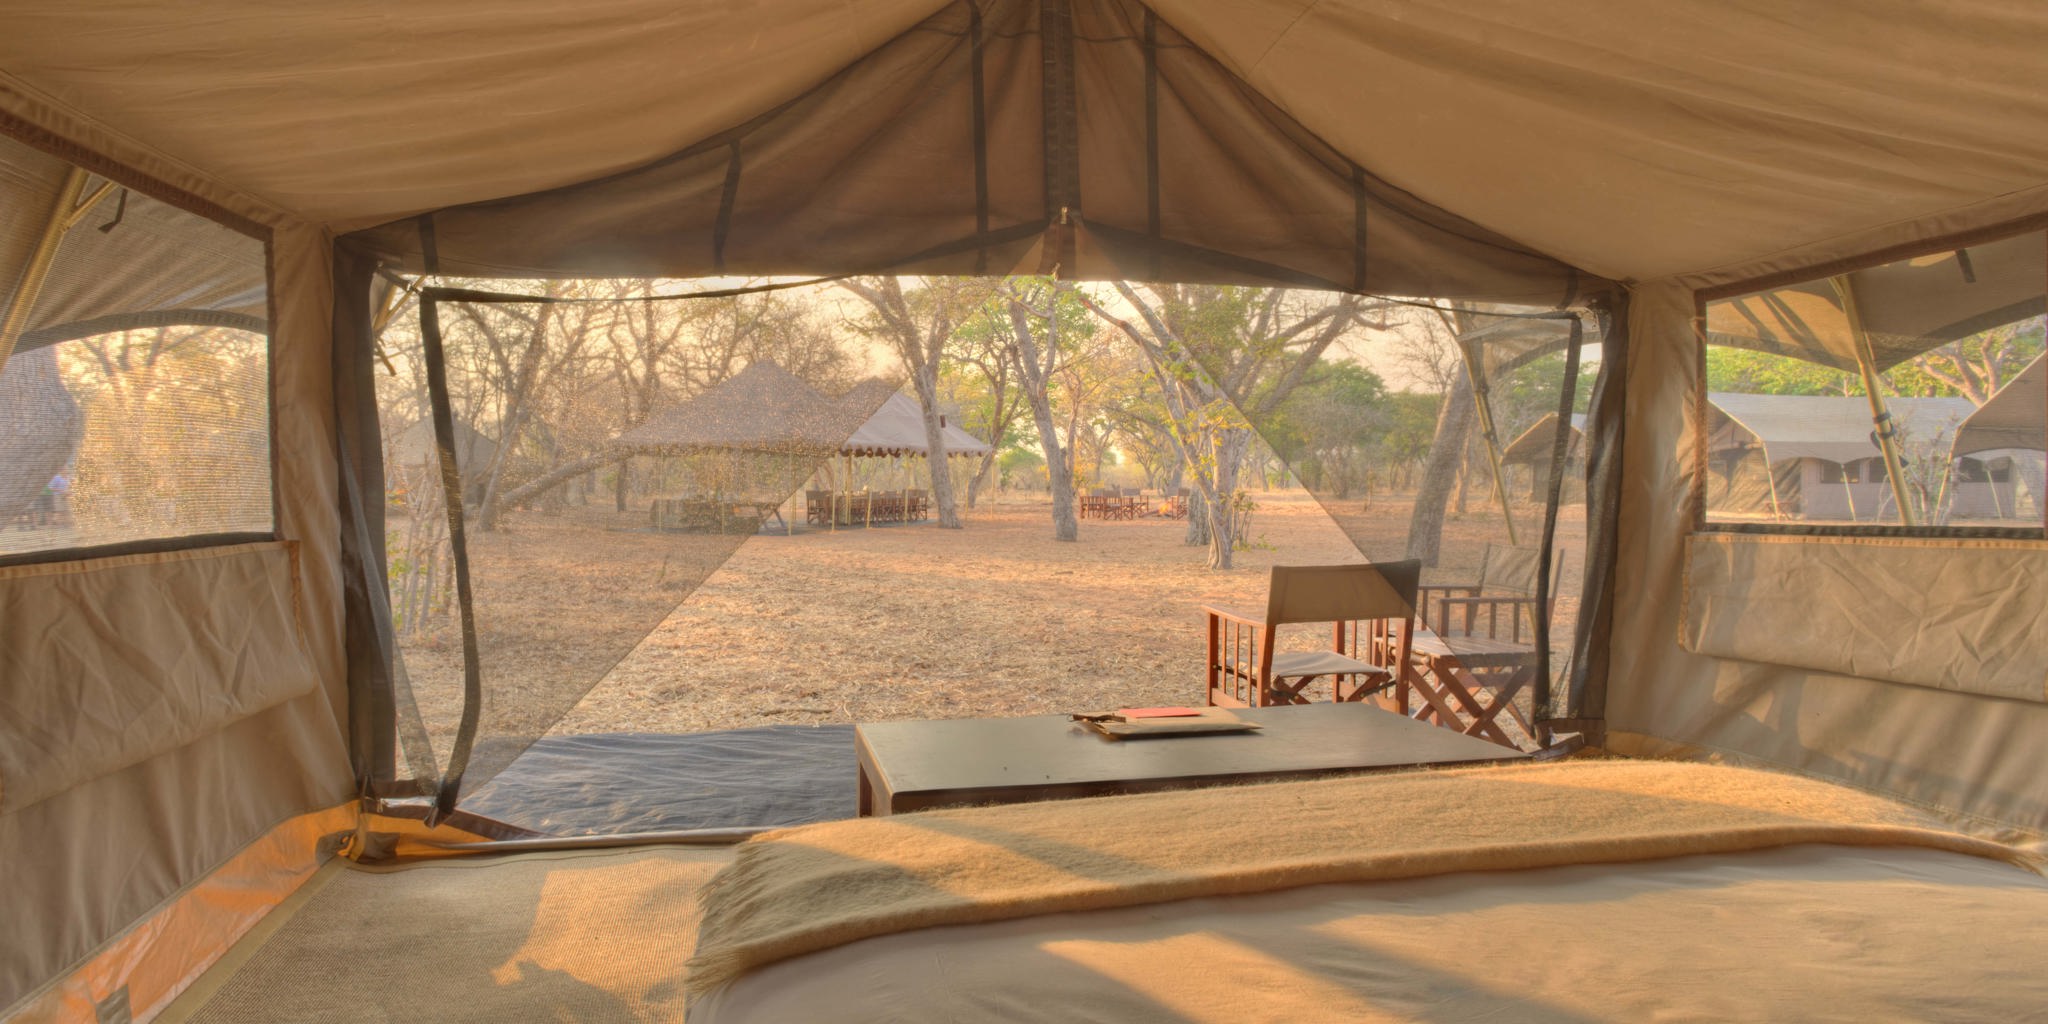 &Beyond Chobe Under Canvas bed room